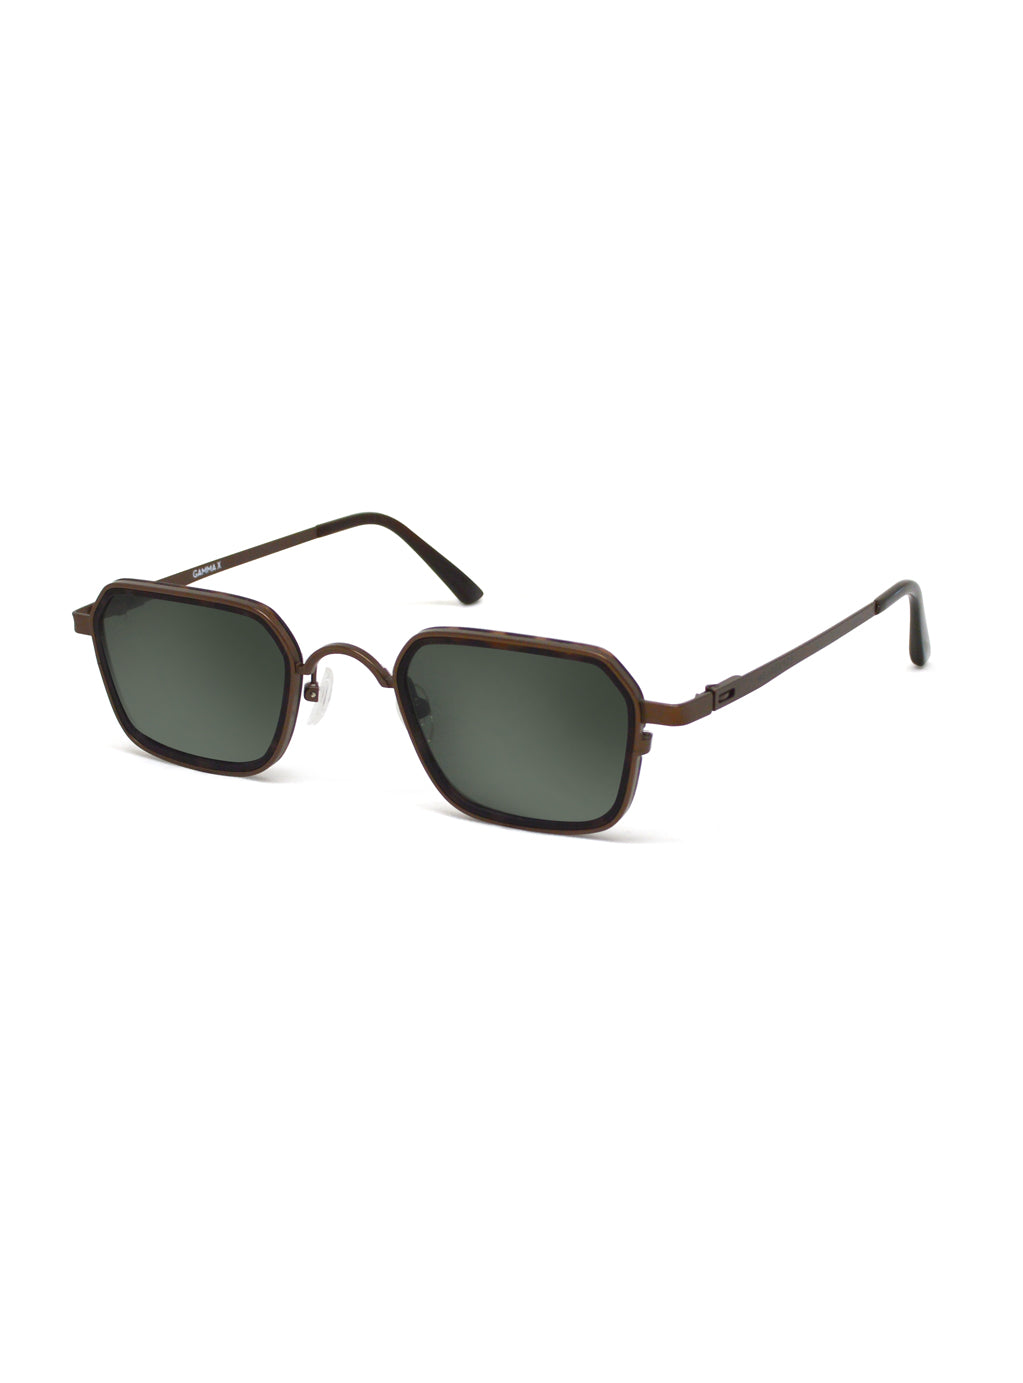 GammaX Brown with Green Lenses